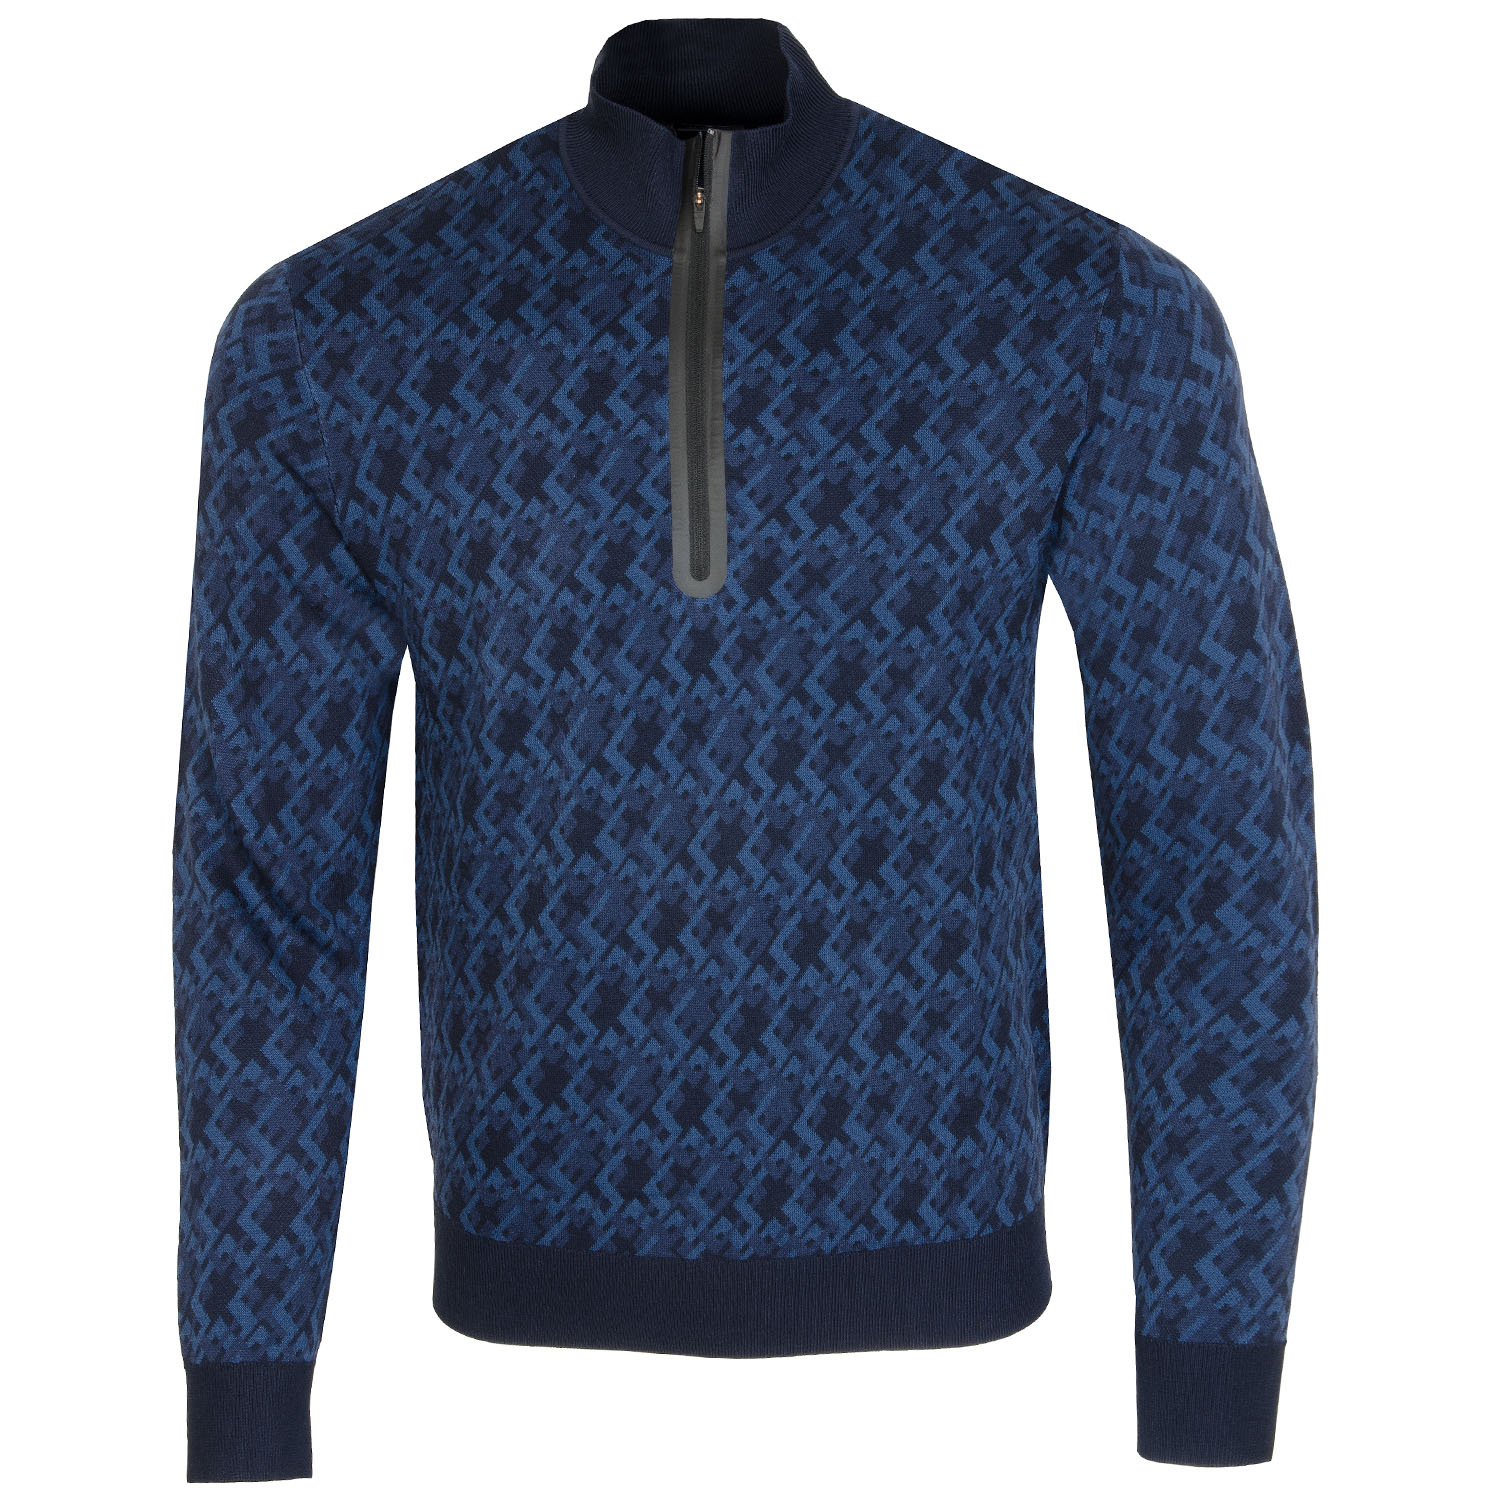 J Lindeberg Nate Knitted Sweater